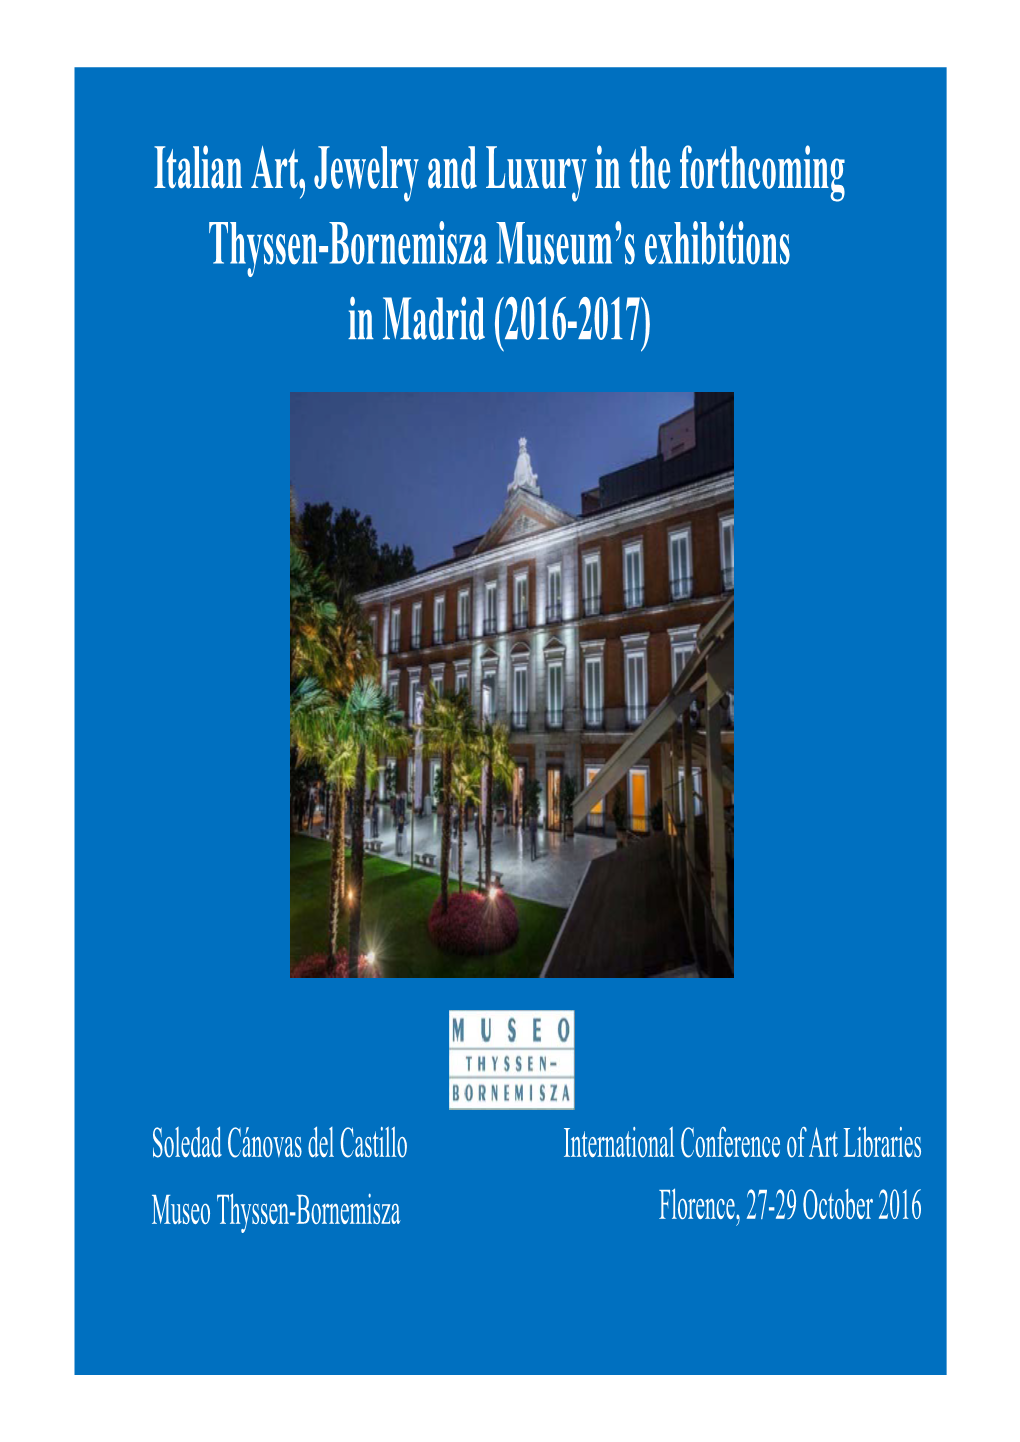 Italian Art, Jewelry and Luxury in the Forthcoming Thyssen-Bornemisza Museum's Exhibitions in Madrid (2016-2017)